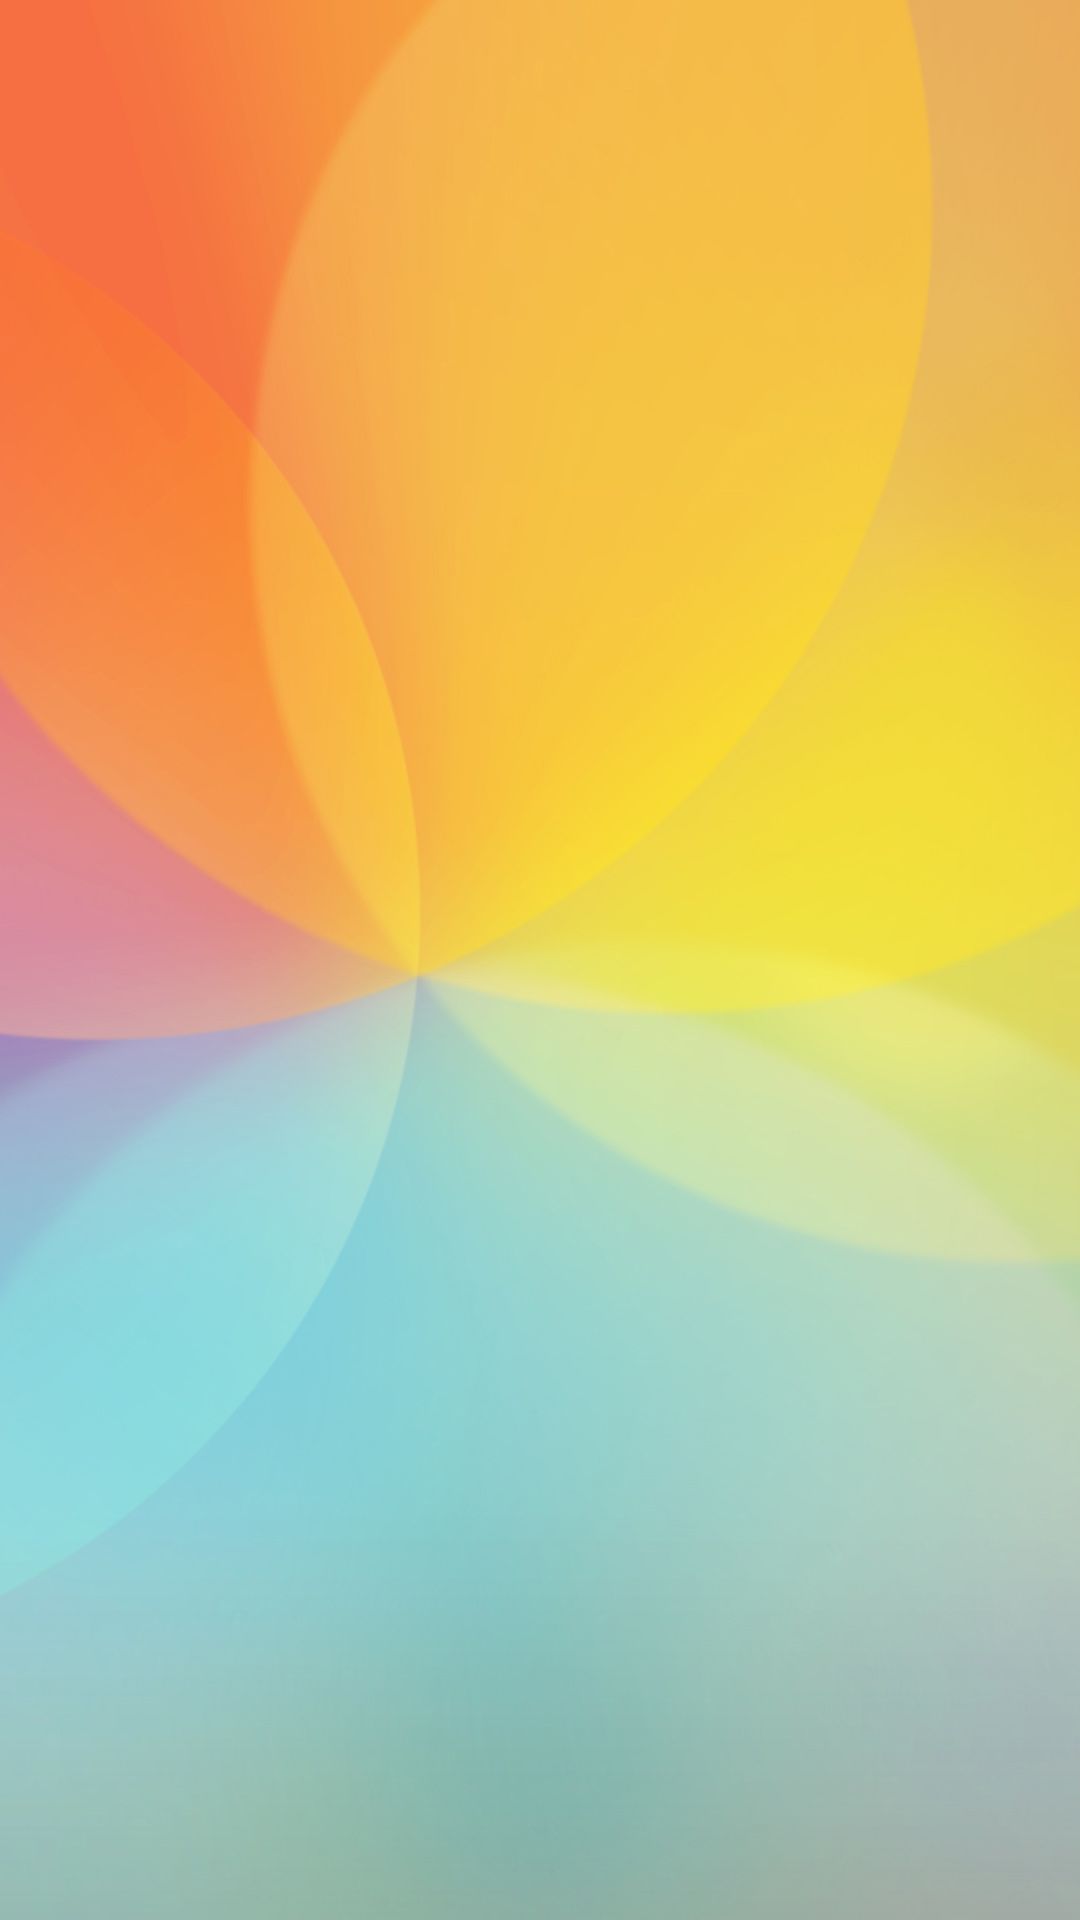 Android- Samsung Galaxy S4 lock wallpaper download (1080x1920 ...